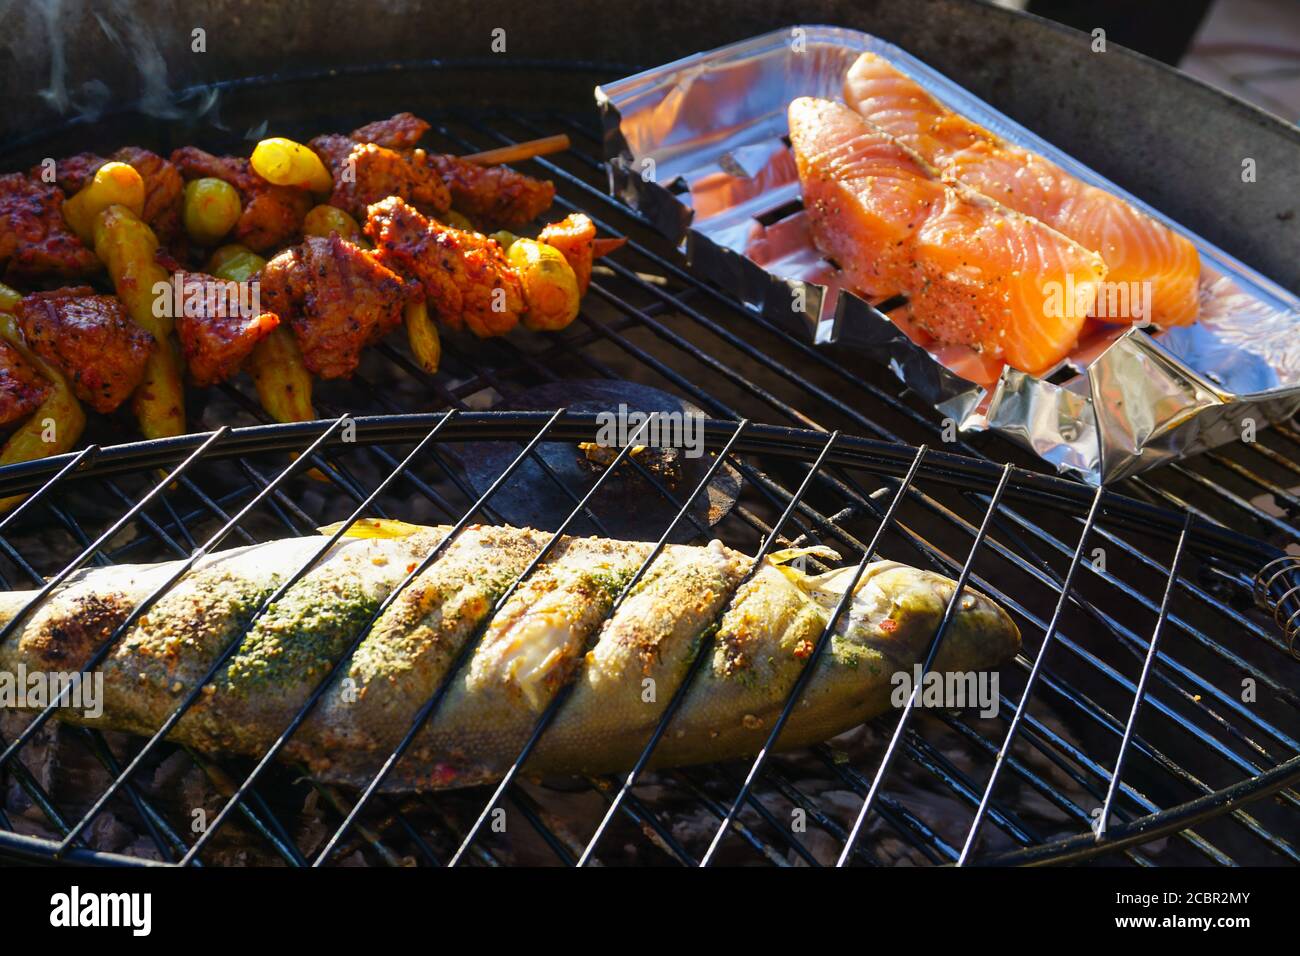 Fish, Salmon and chicken Skewer on the grill Stock Photo